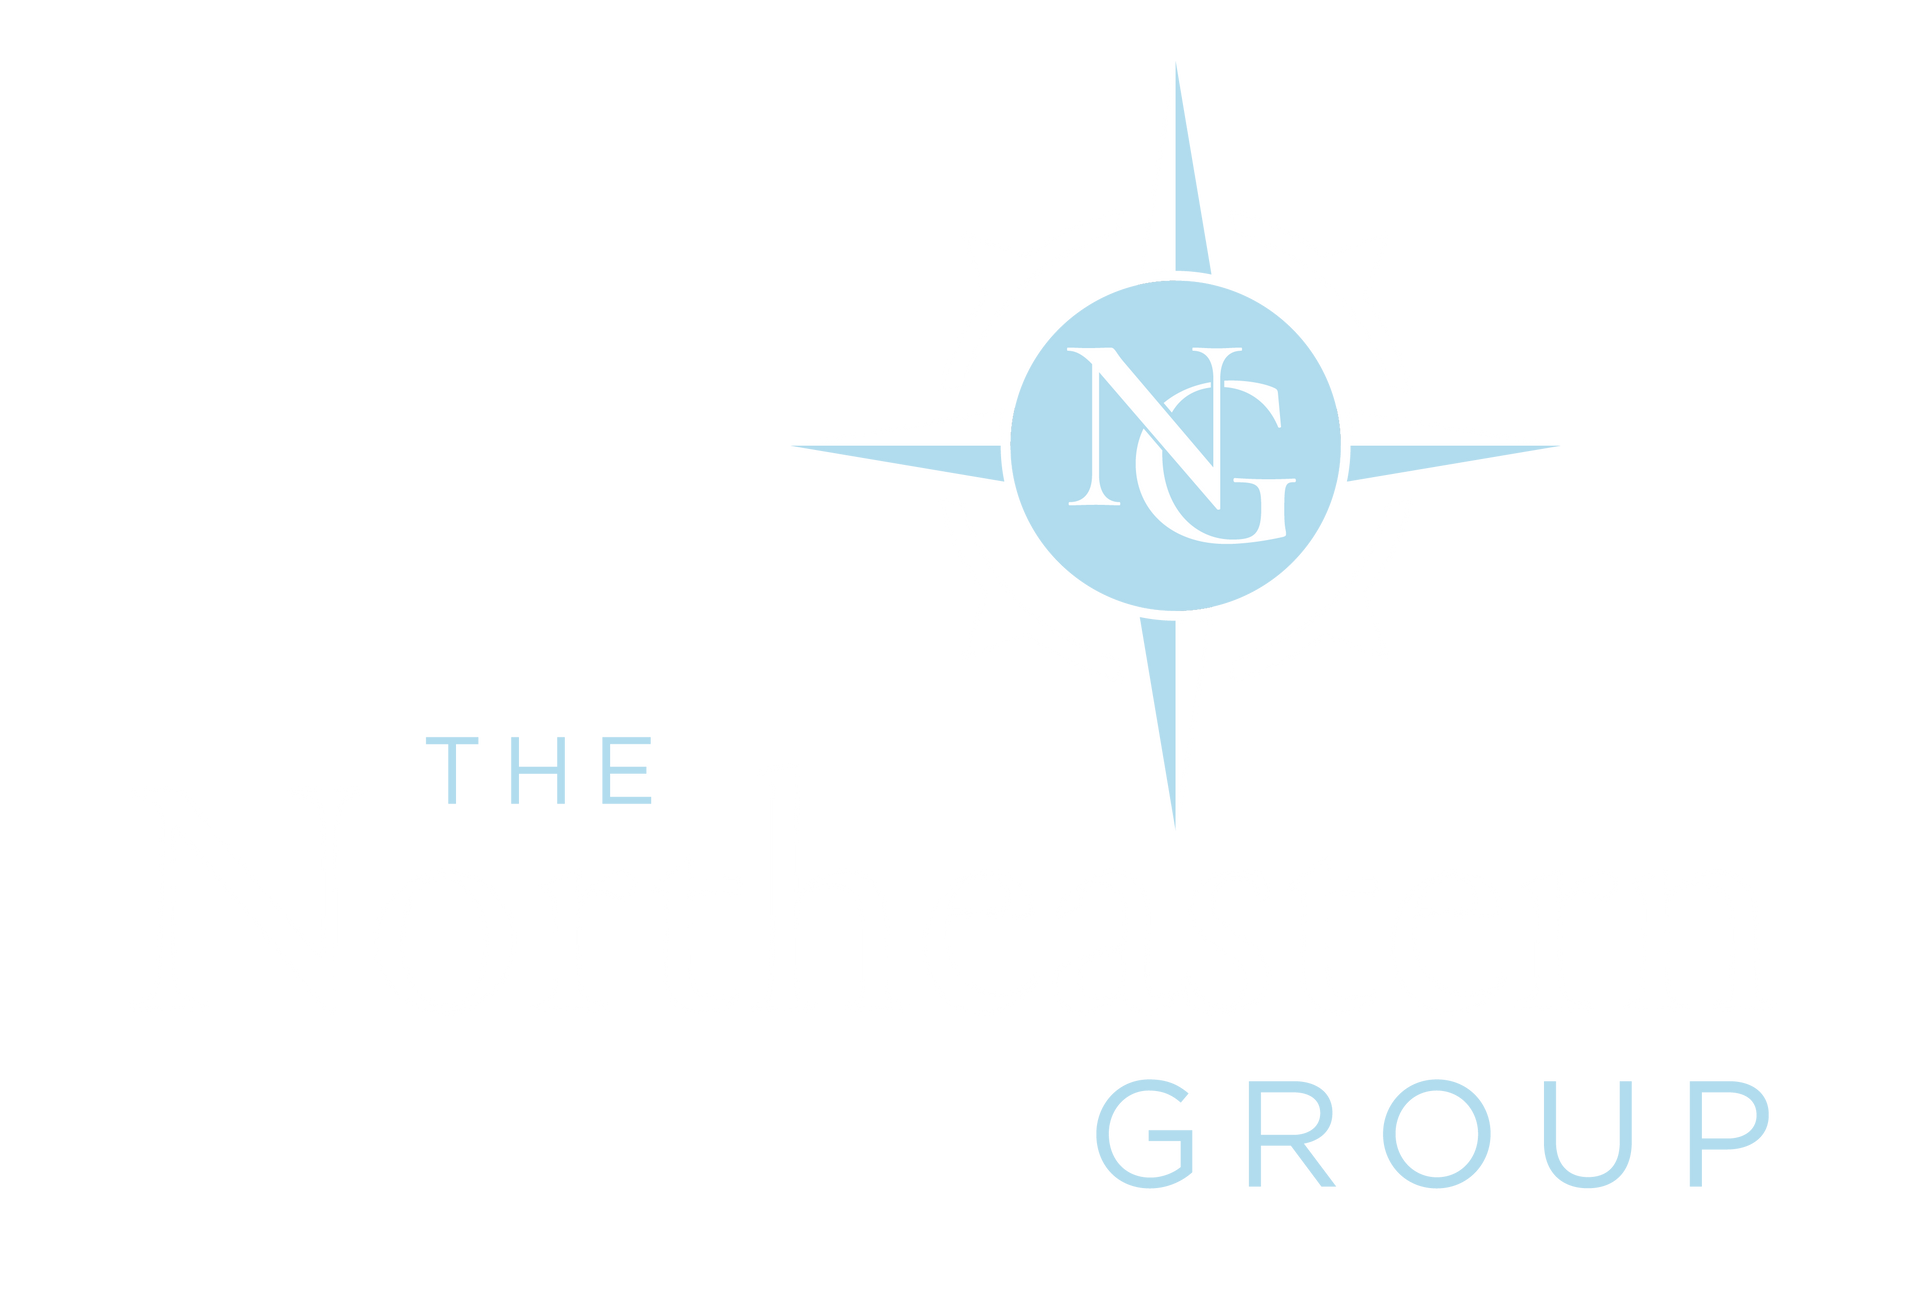 The Northeastern Group